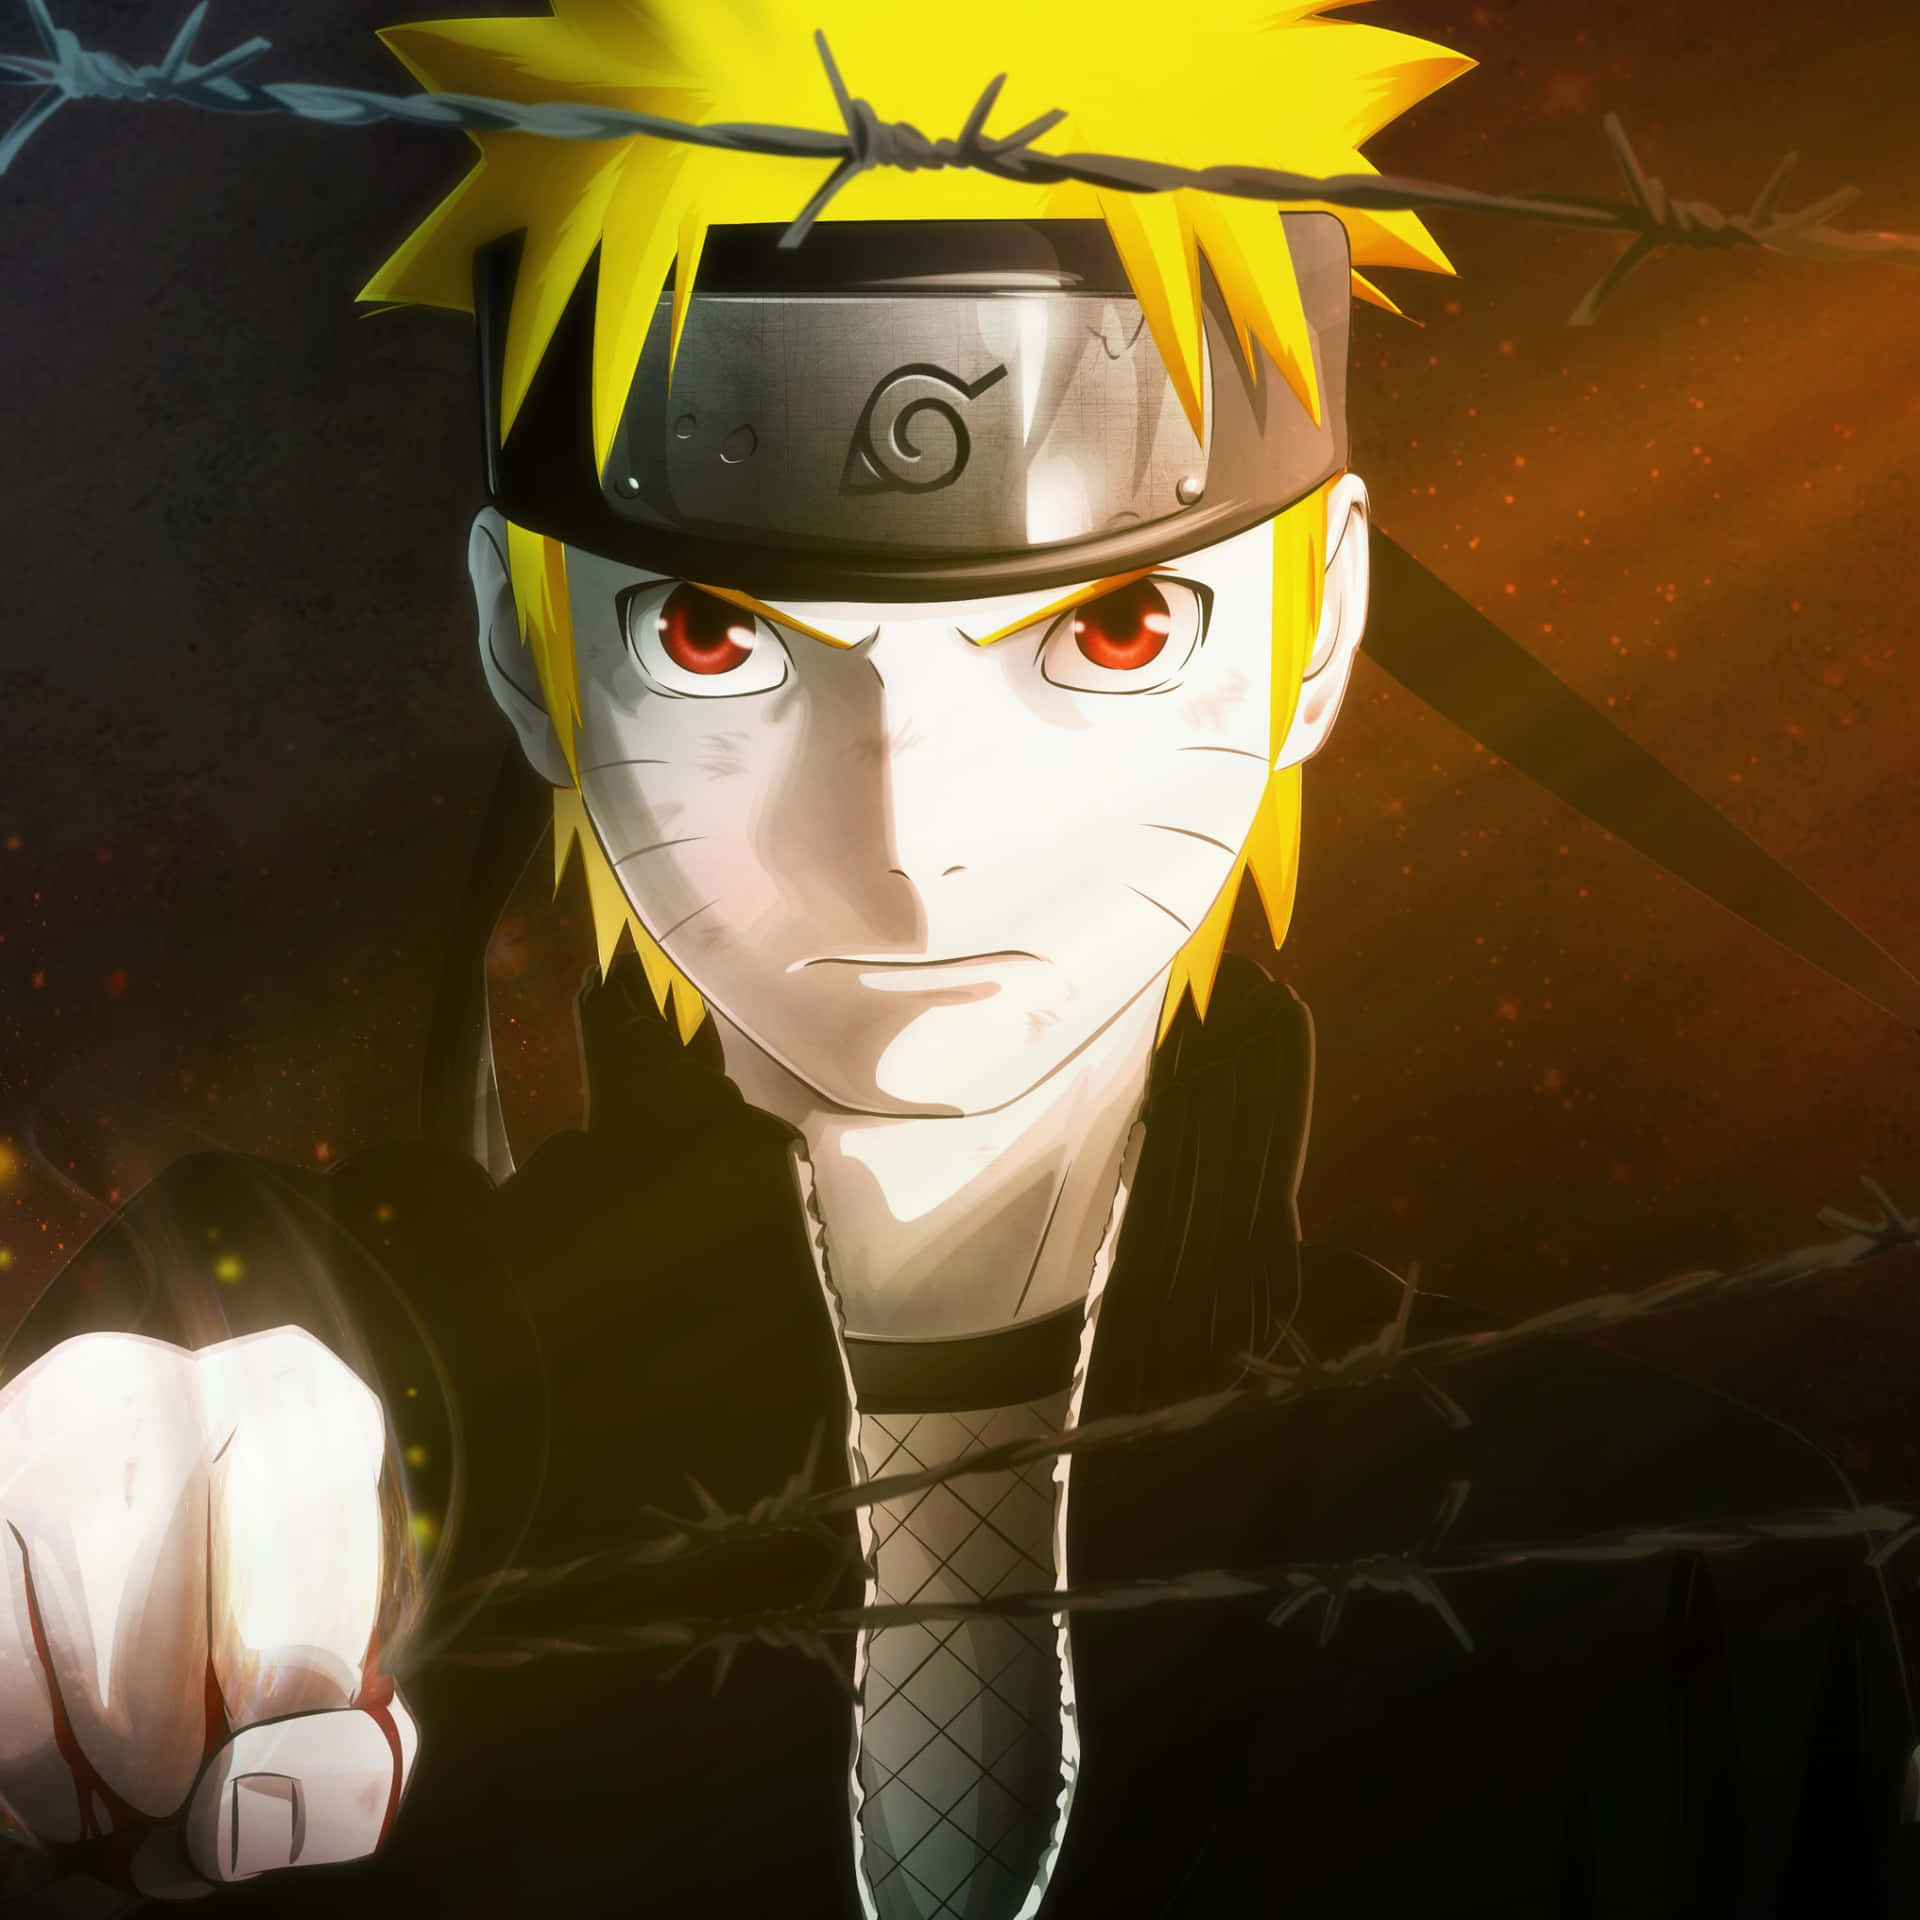 Follow Naruto's Lead And Reach Your Dreams